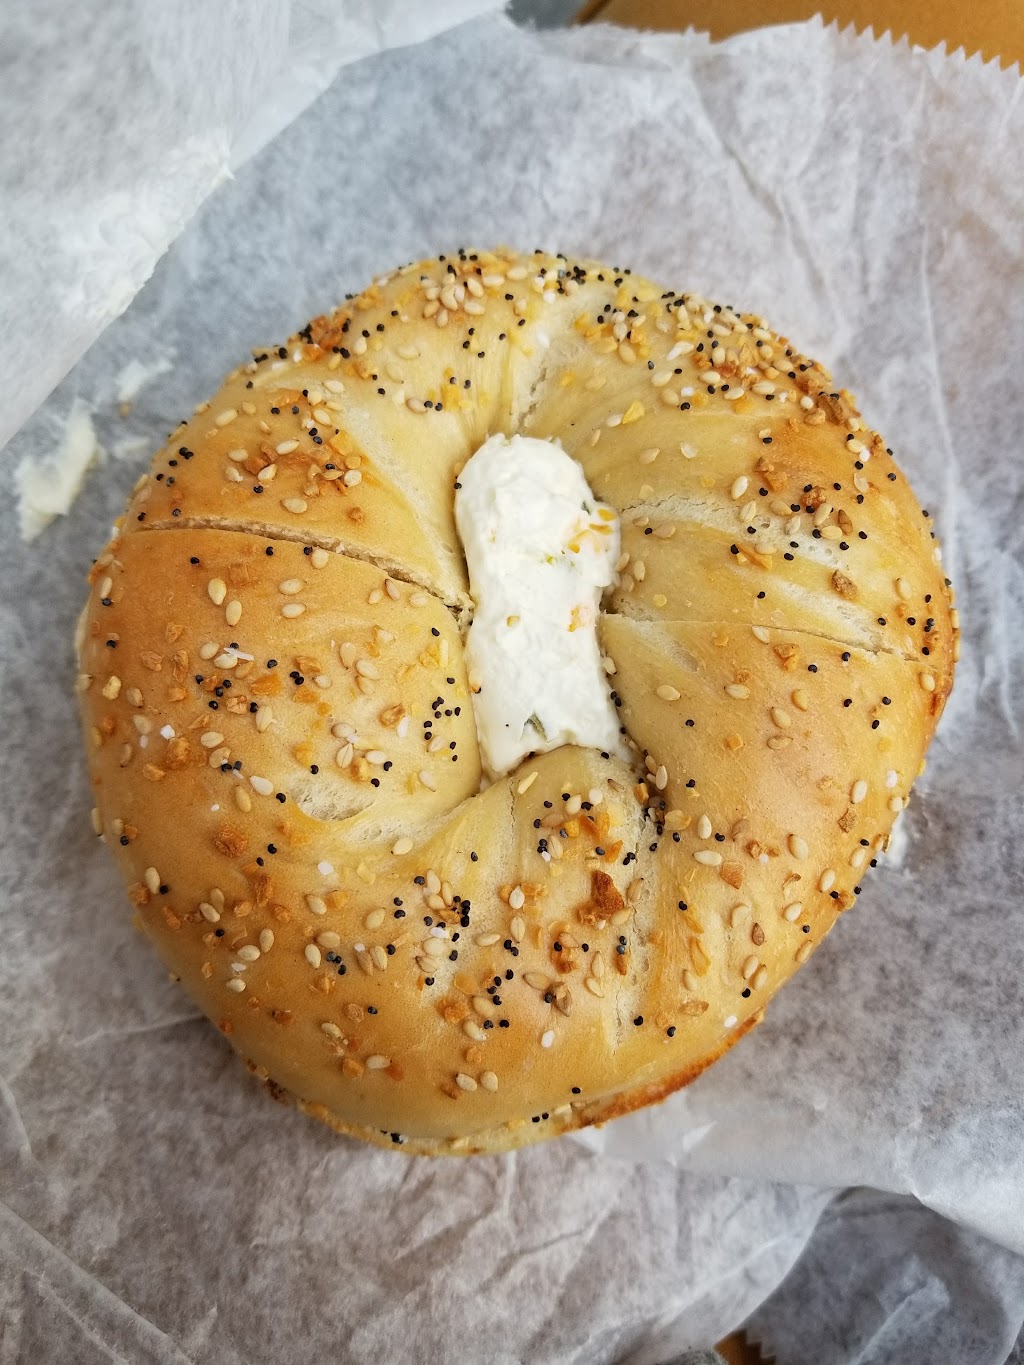 Have A Bagel | 197 Havemeyer St, Brooklyn, NY 11211 | Phone: (718) 782-0111